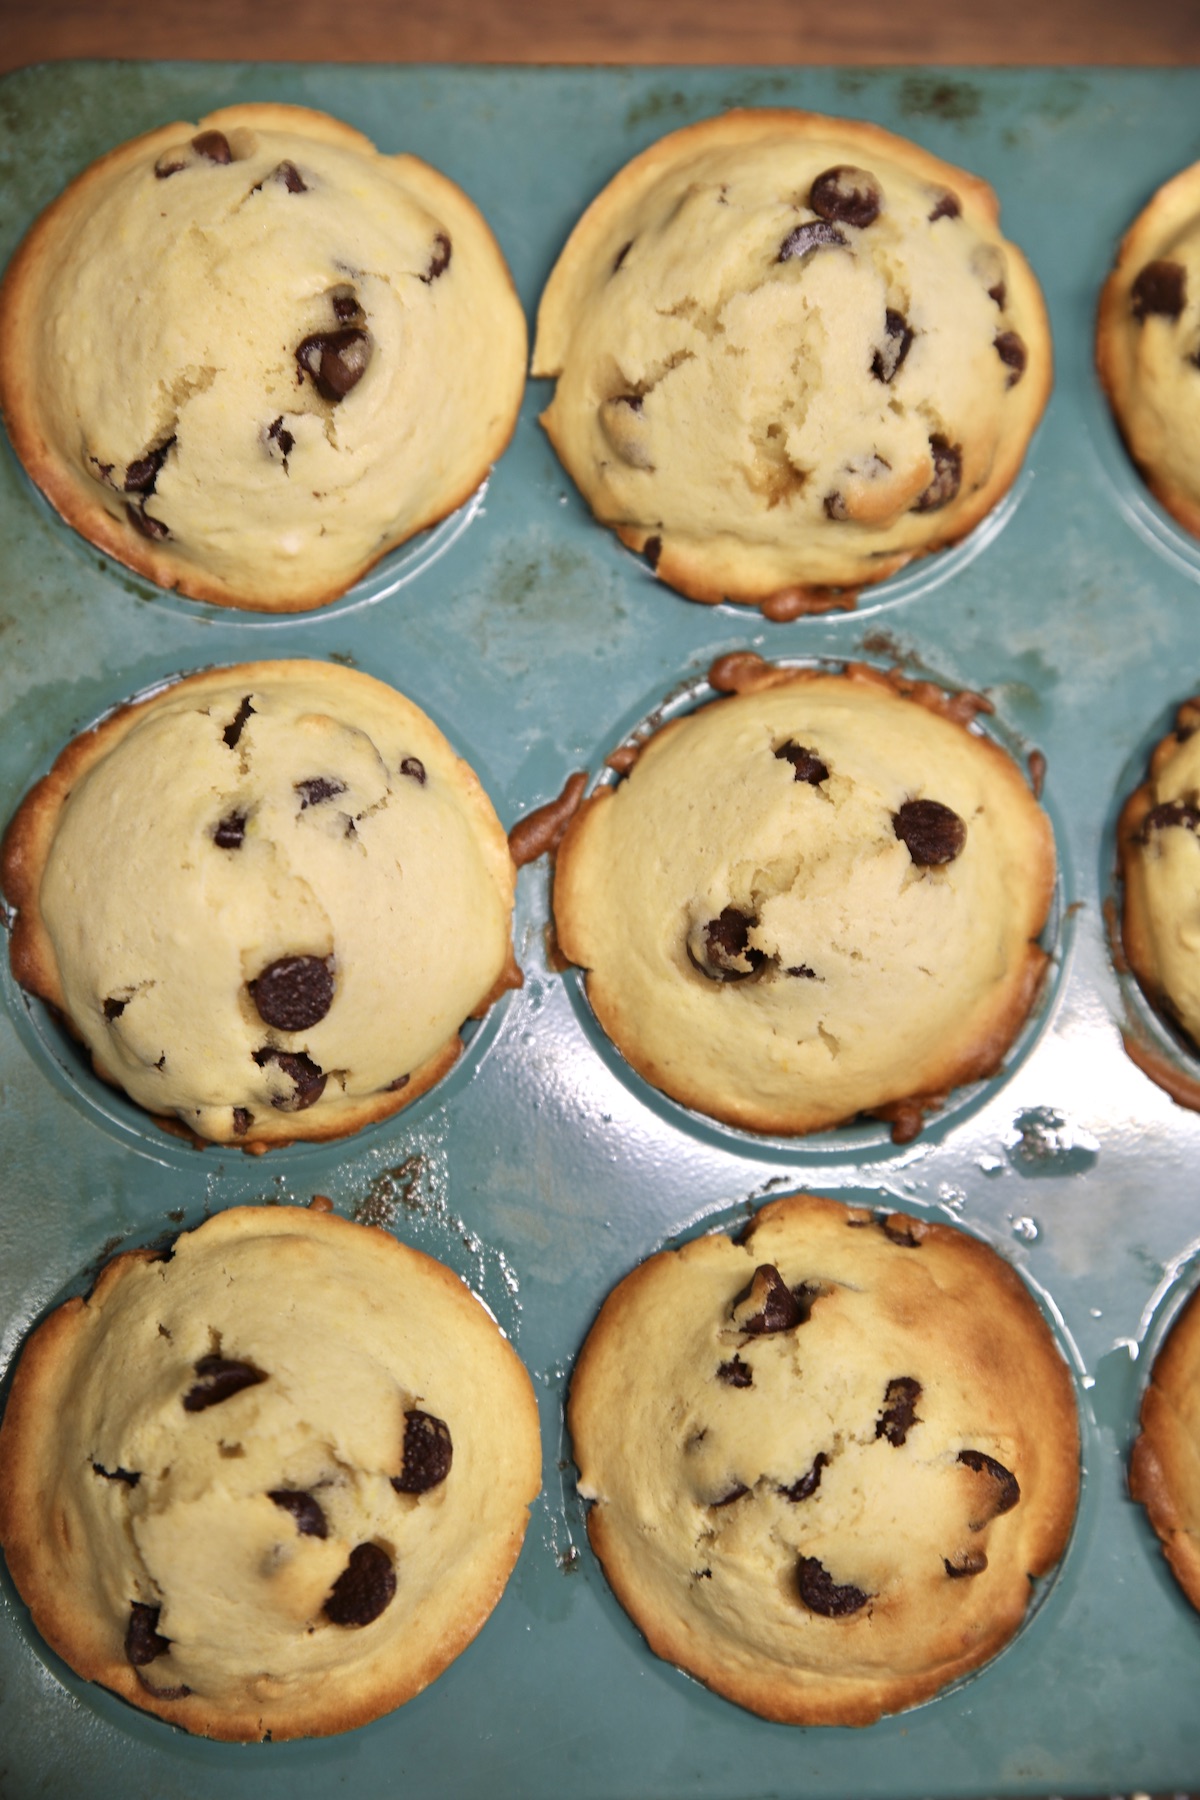 Baked muffins with chocolate chips in a tin.